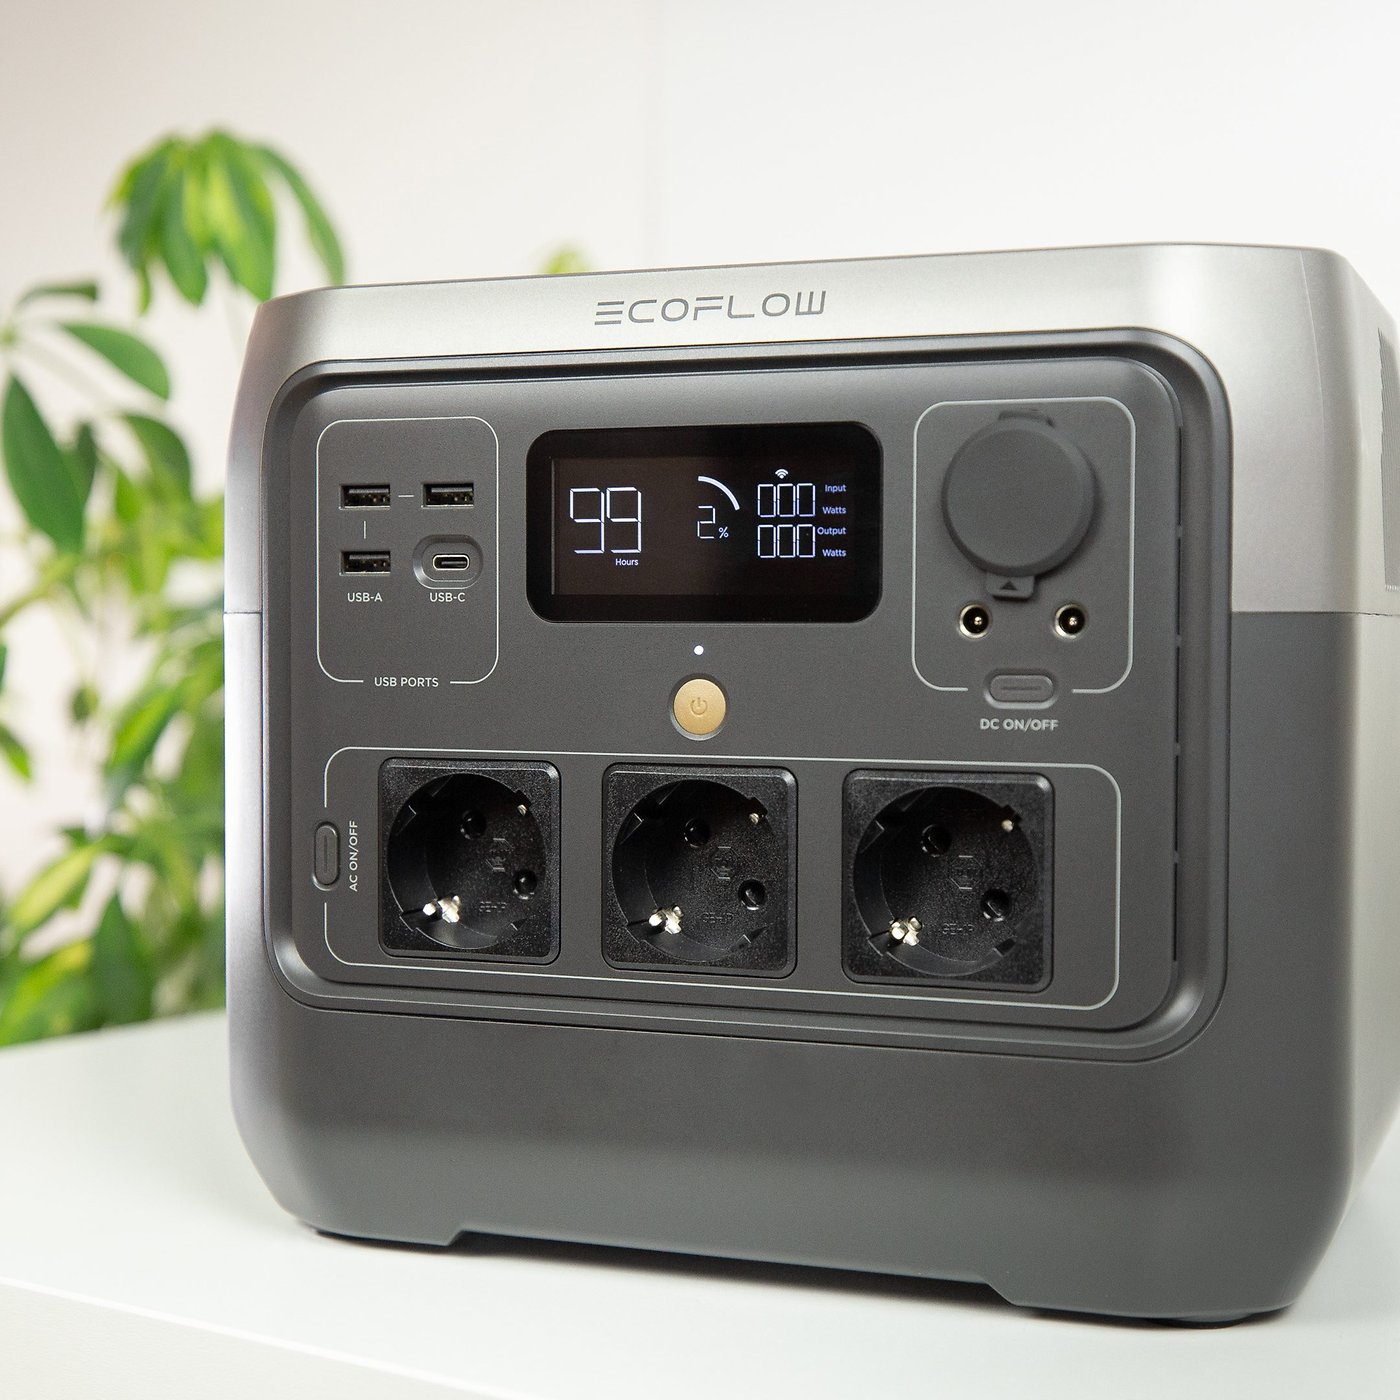 Allpowers R1500 Review: Super-efficient 1 kWh Power Station